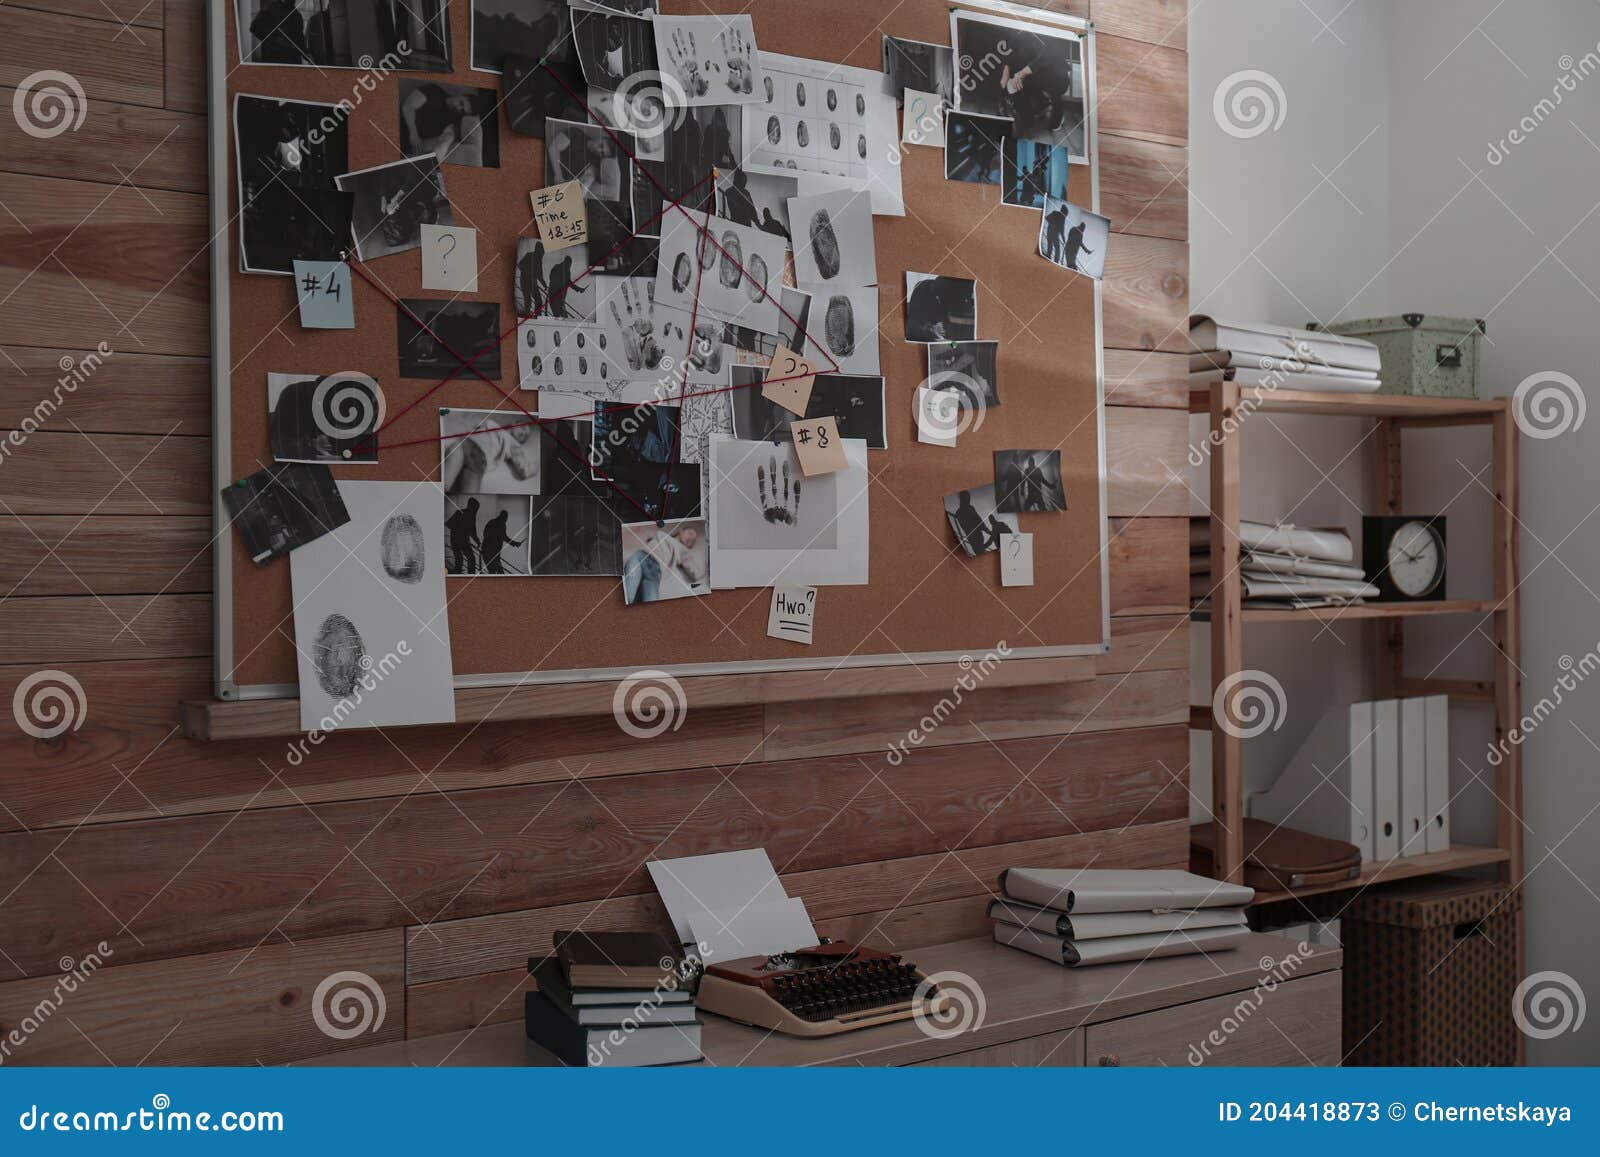 Detective Office Interior with Evidence Board on Wall Stock Image ...